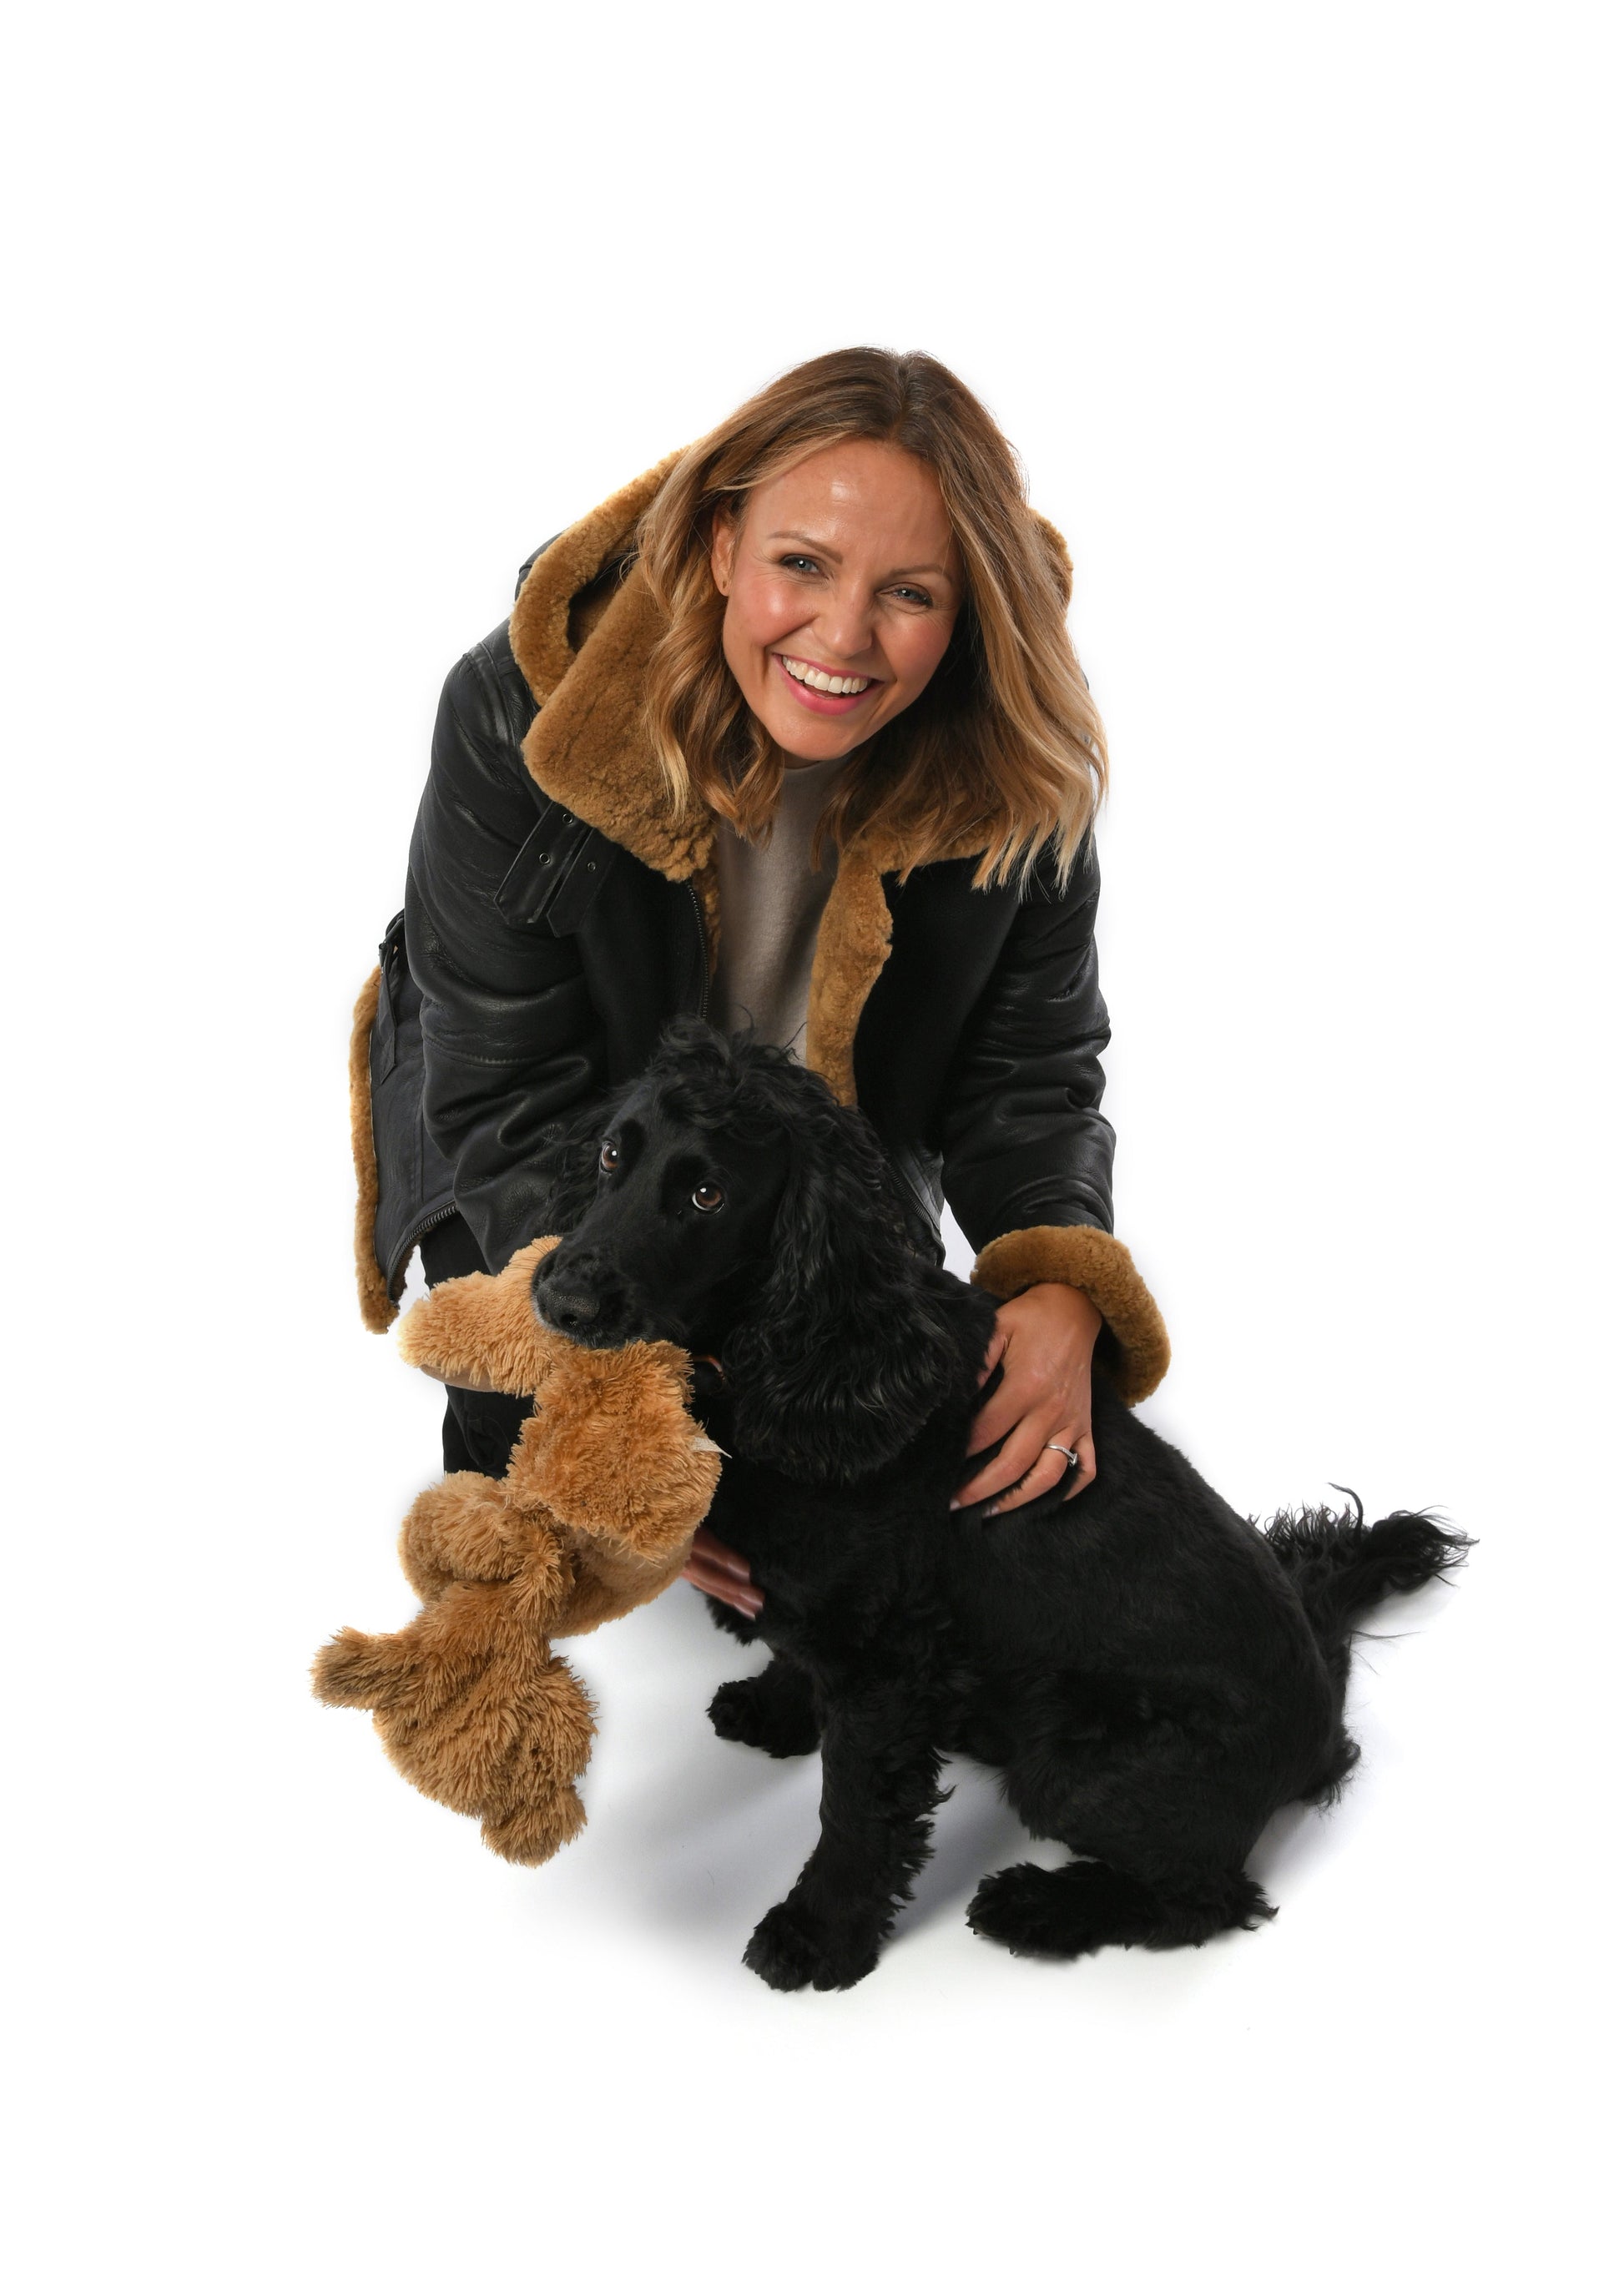 Brown Hooded Sheepskin Ladies Flying Leather Jacket for sale - Woodcock and Cavendish